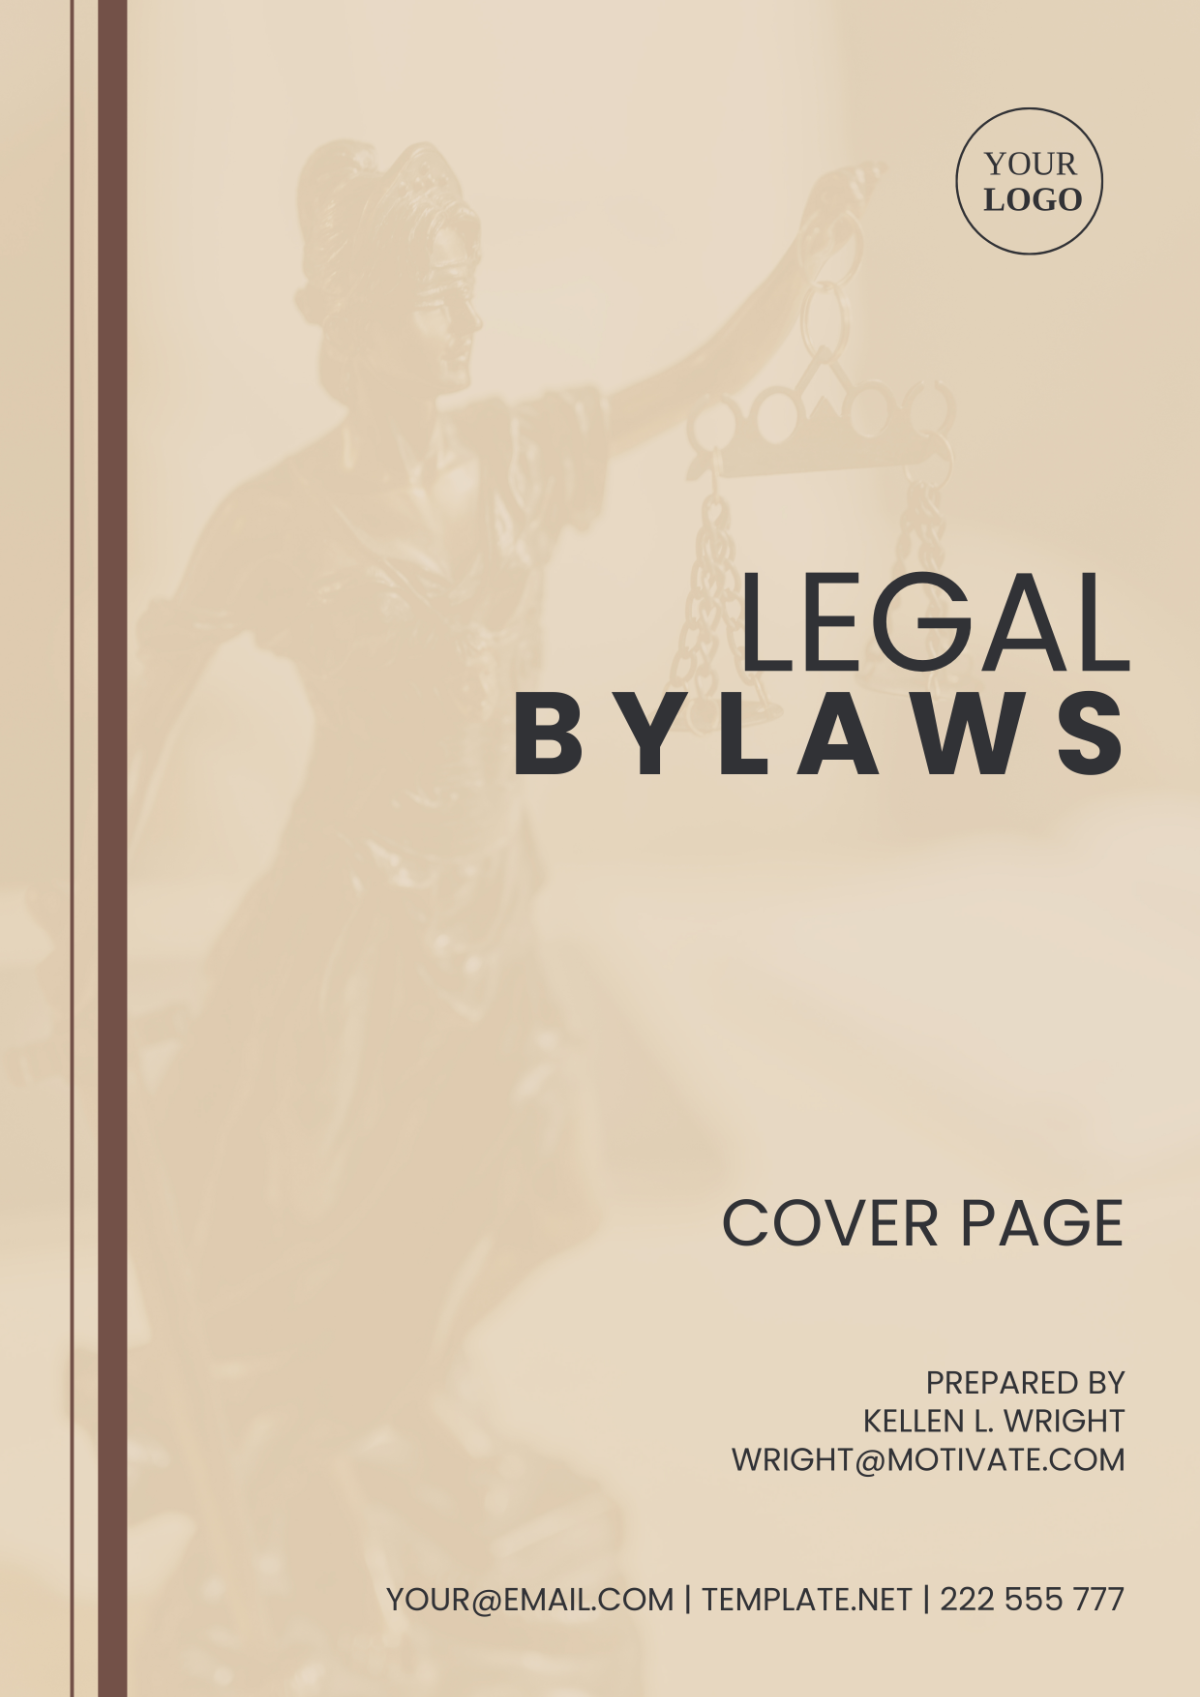 Legal Bylaws Cover Page Template